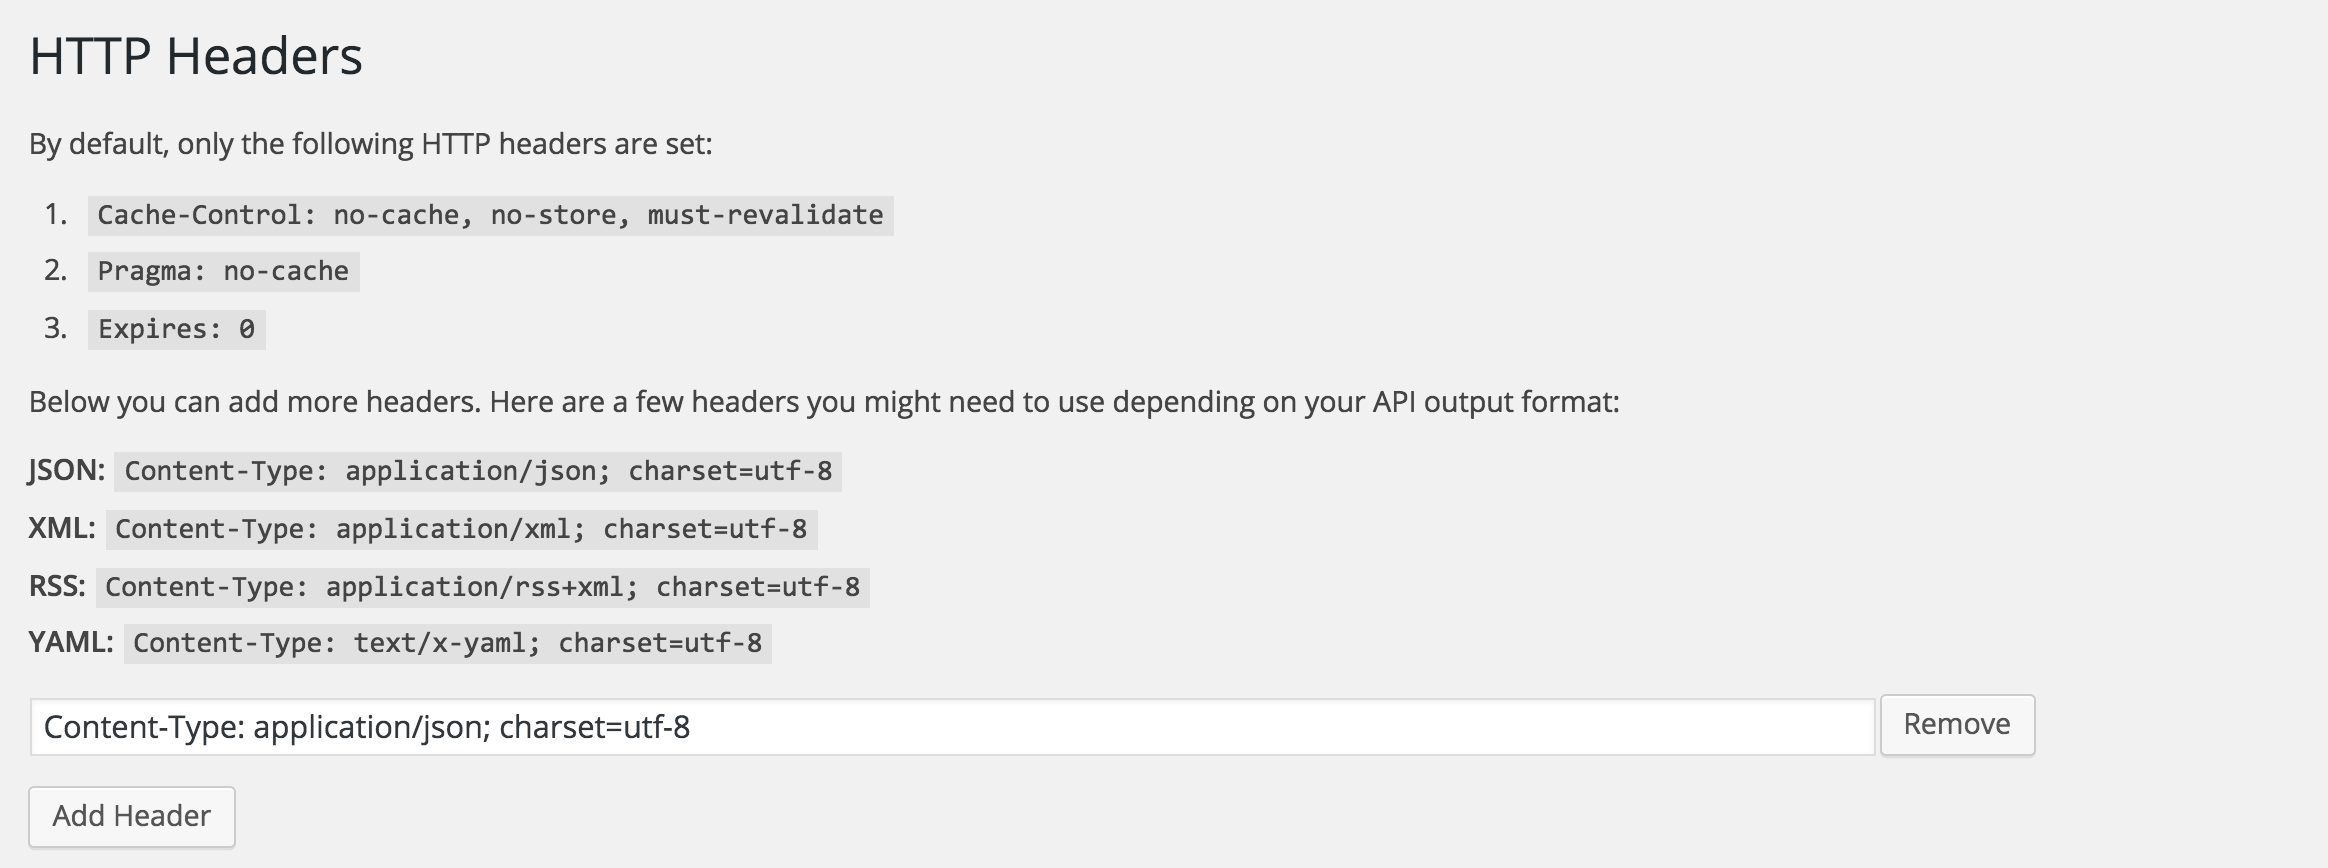 HTTP headers configuration: by default, anti-cache headers are set, but you can add any headers depending on what format you want your API to output. It hints you about headers to use for most popular formats: JSON, XML, RSS and YAML.